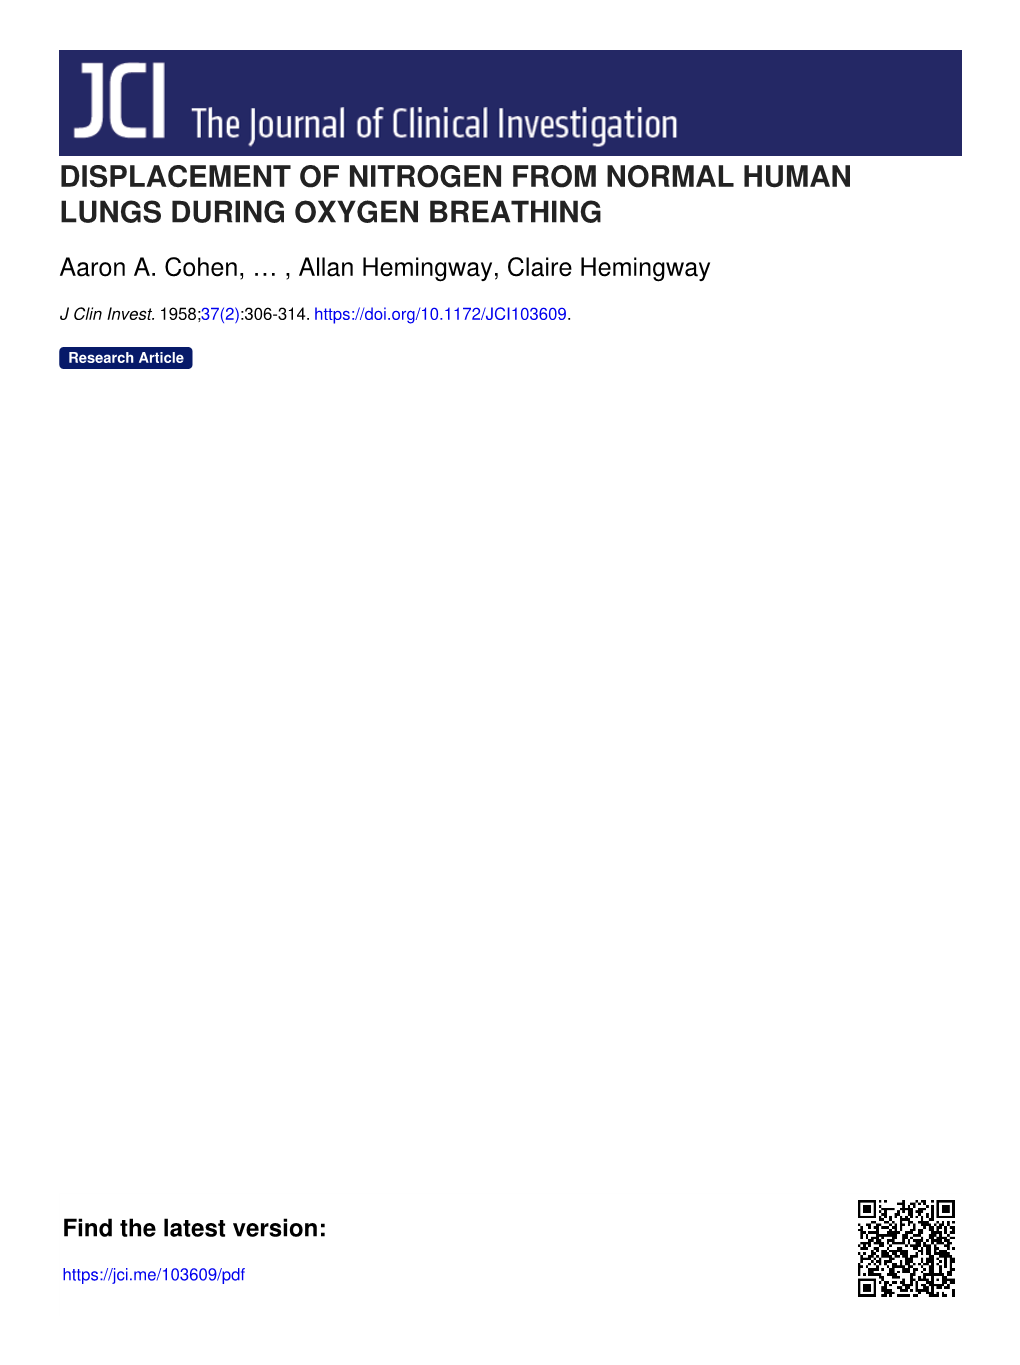 Displacement of Nitrogen from Normal Human Lungs During Oxygen Breathing